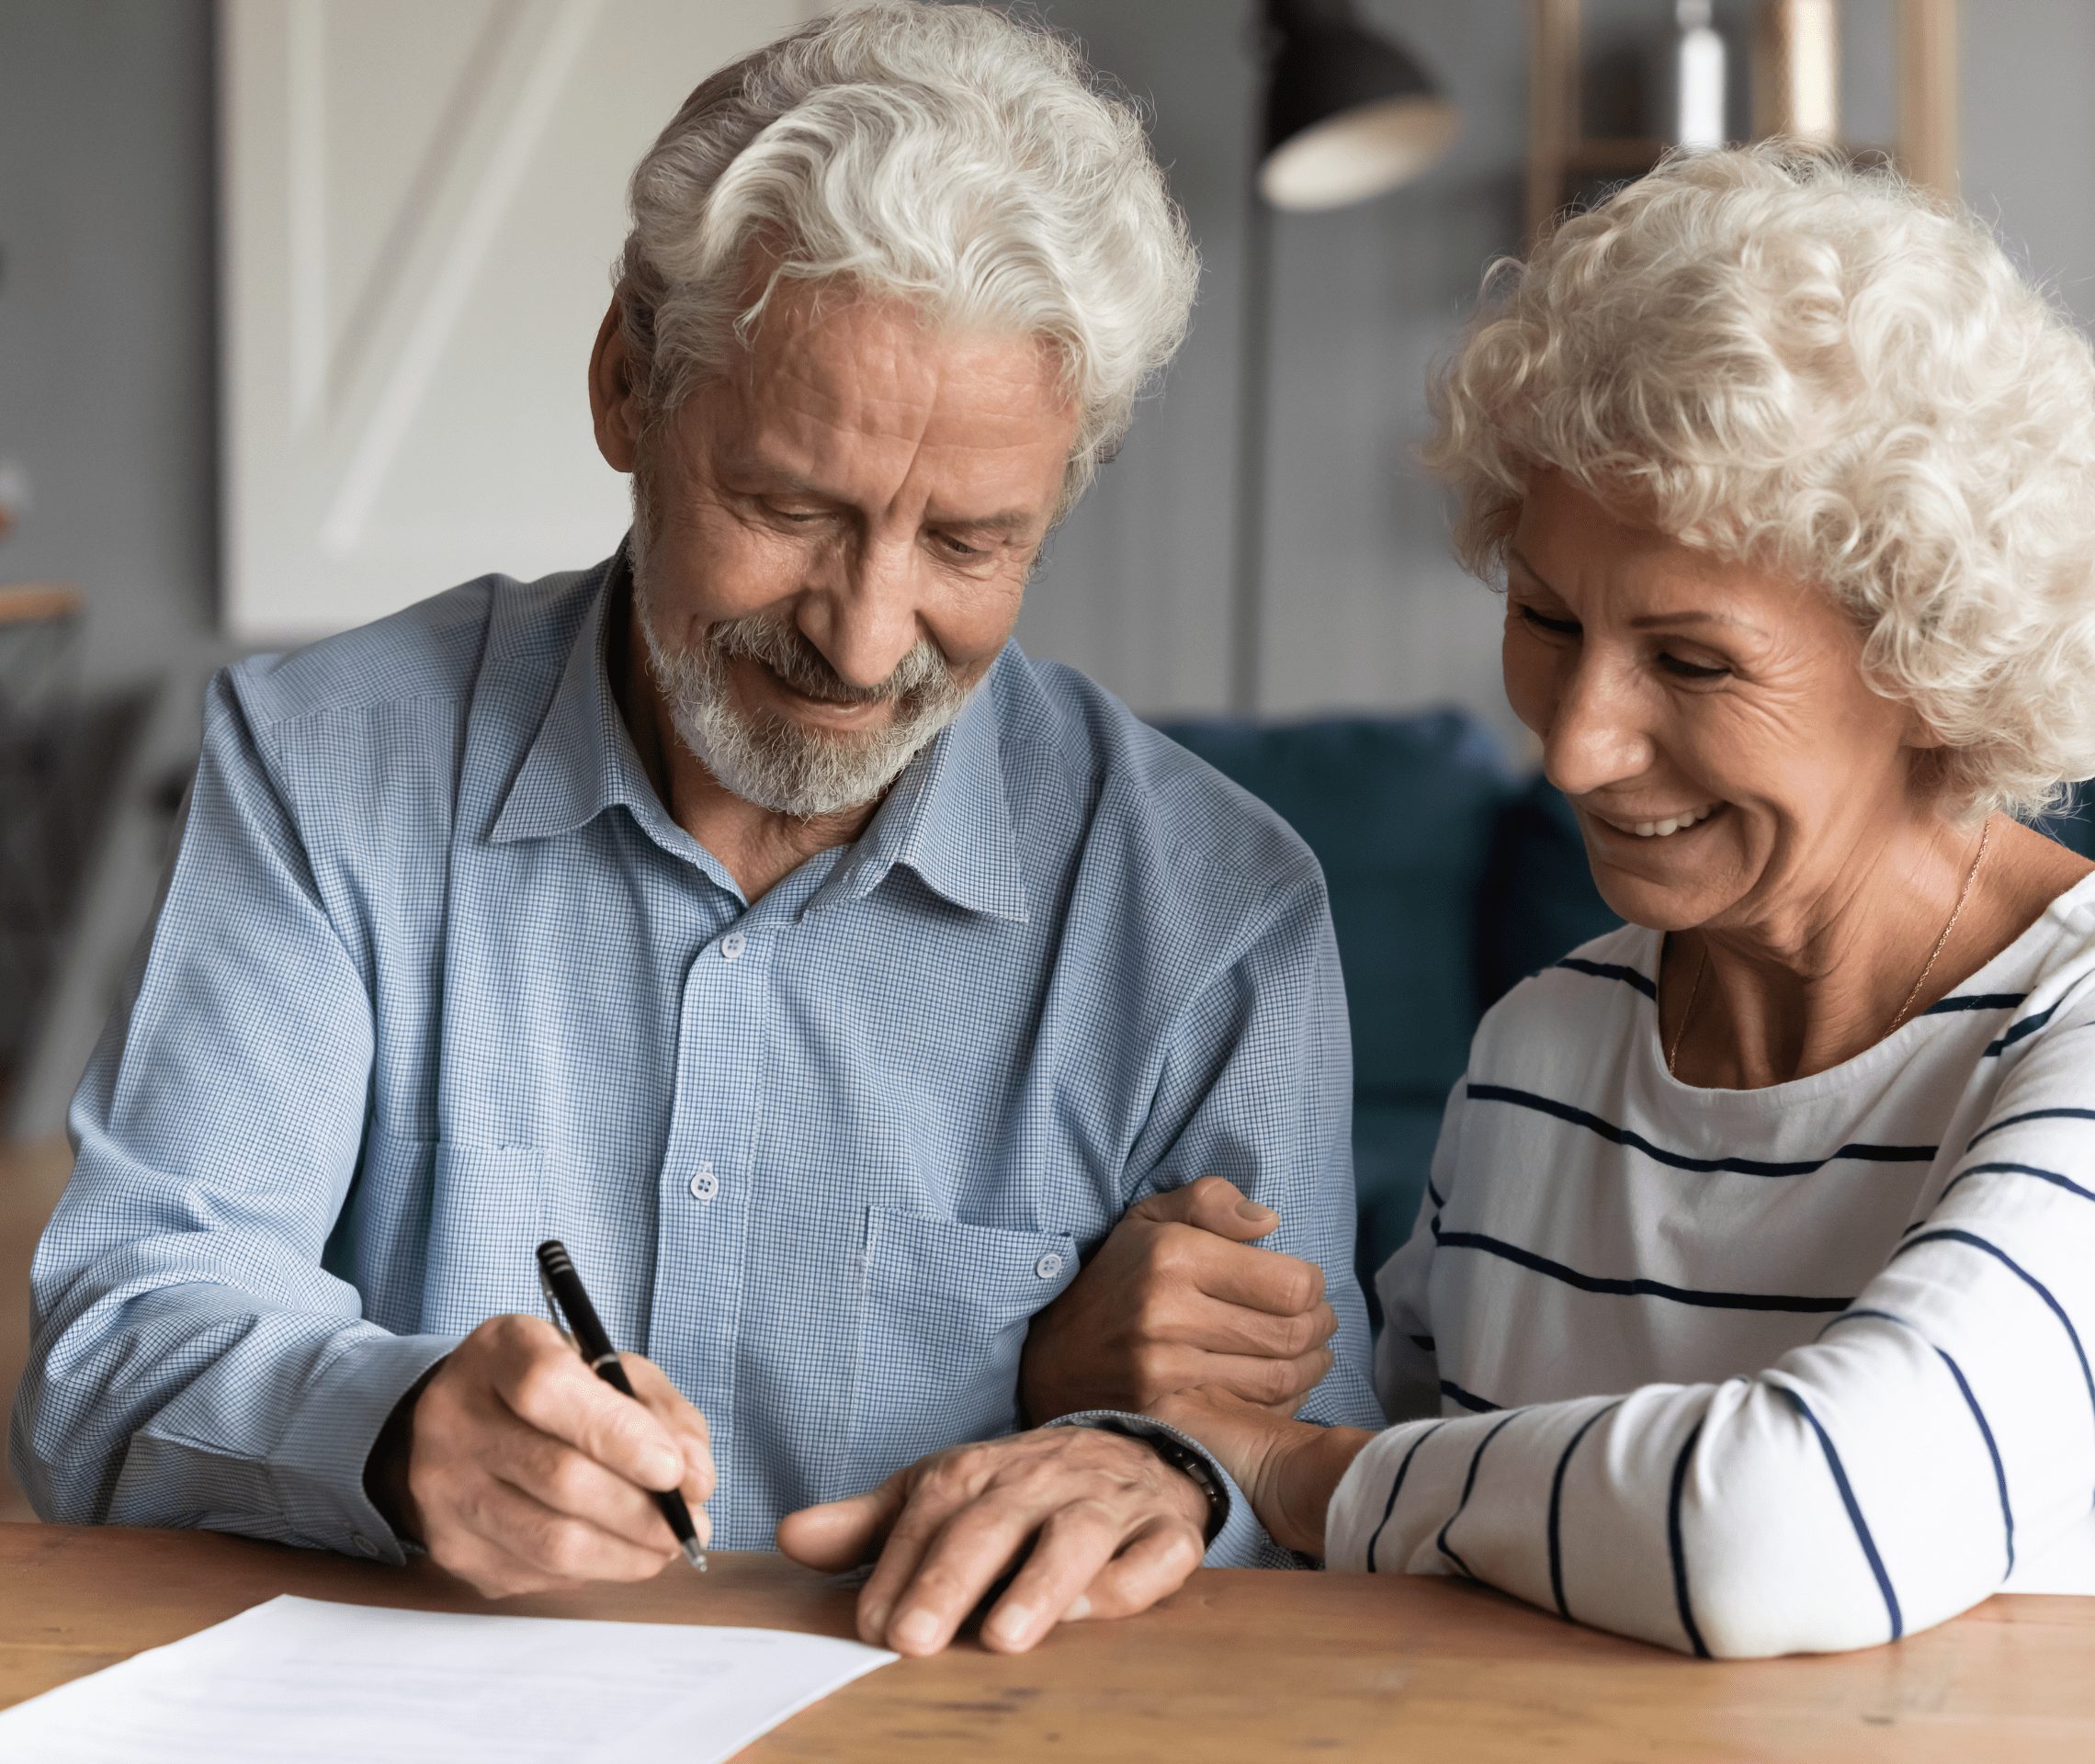 Legal Documents to Have in Place Before Your Loved One Passes